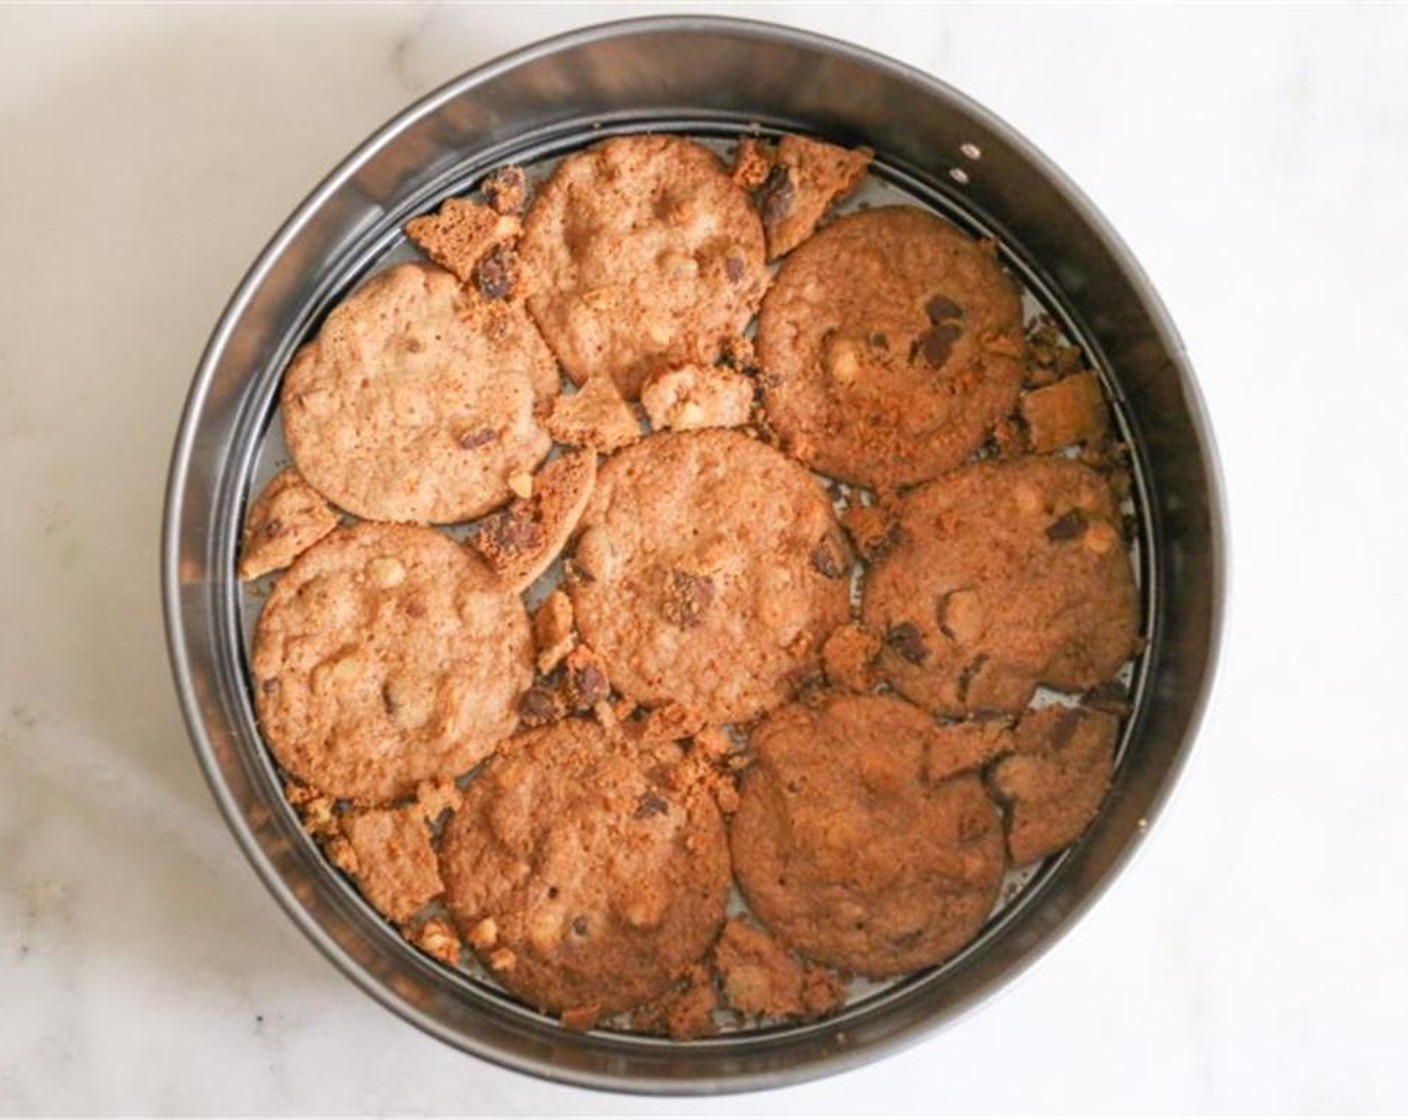 step 3 To assemble the cake, arrange Chocolate Chip Cookies (3 pckg) flat in an 8 or 9-inch springform pan, covering as much of the bottom as possible. Break up a cookie or two to fill in any gaps.